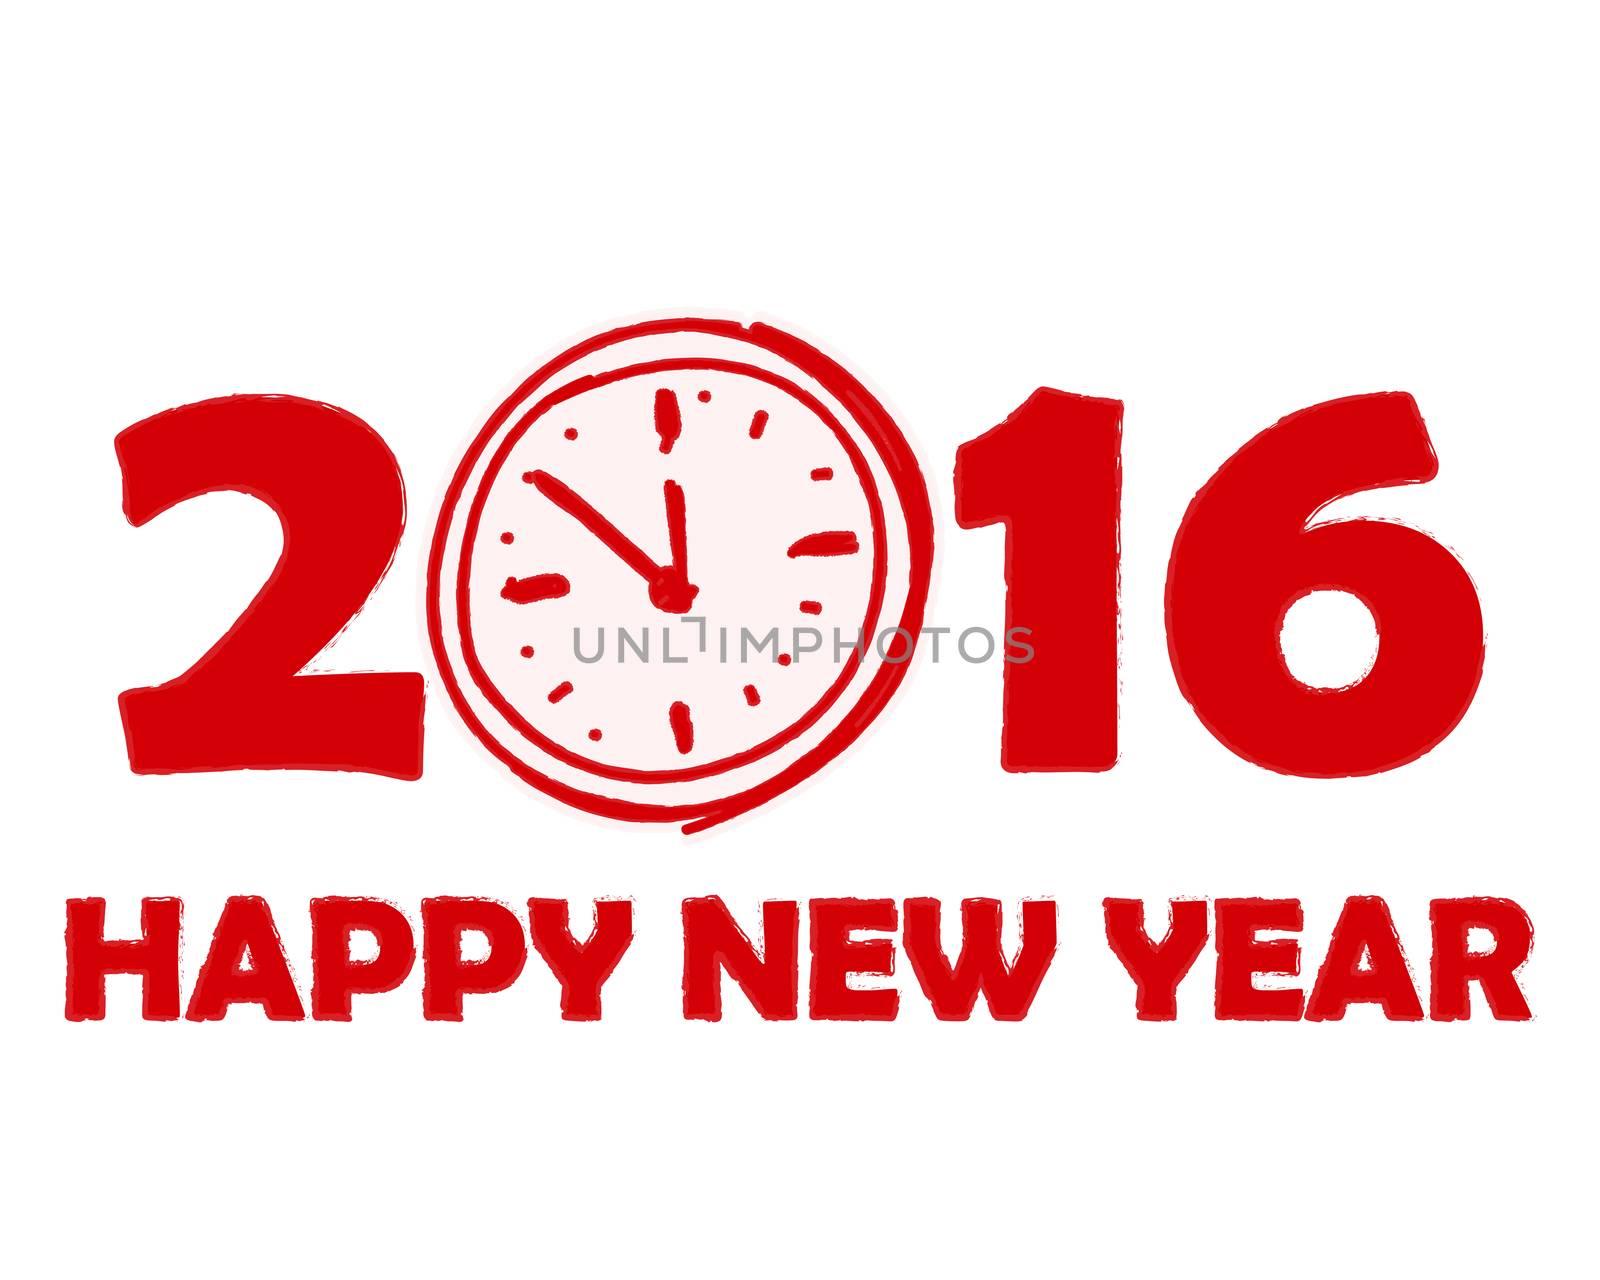 happy new year 2016 with clock sign in red drawn banner, holiday concept